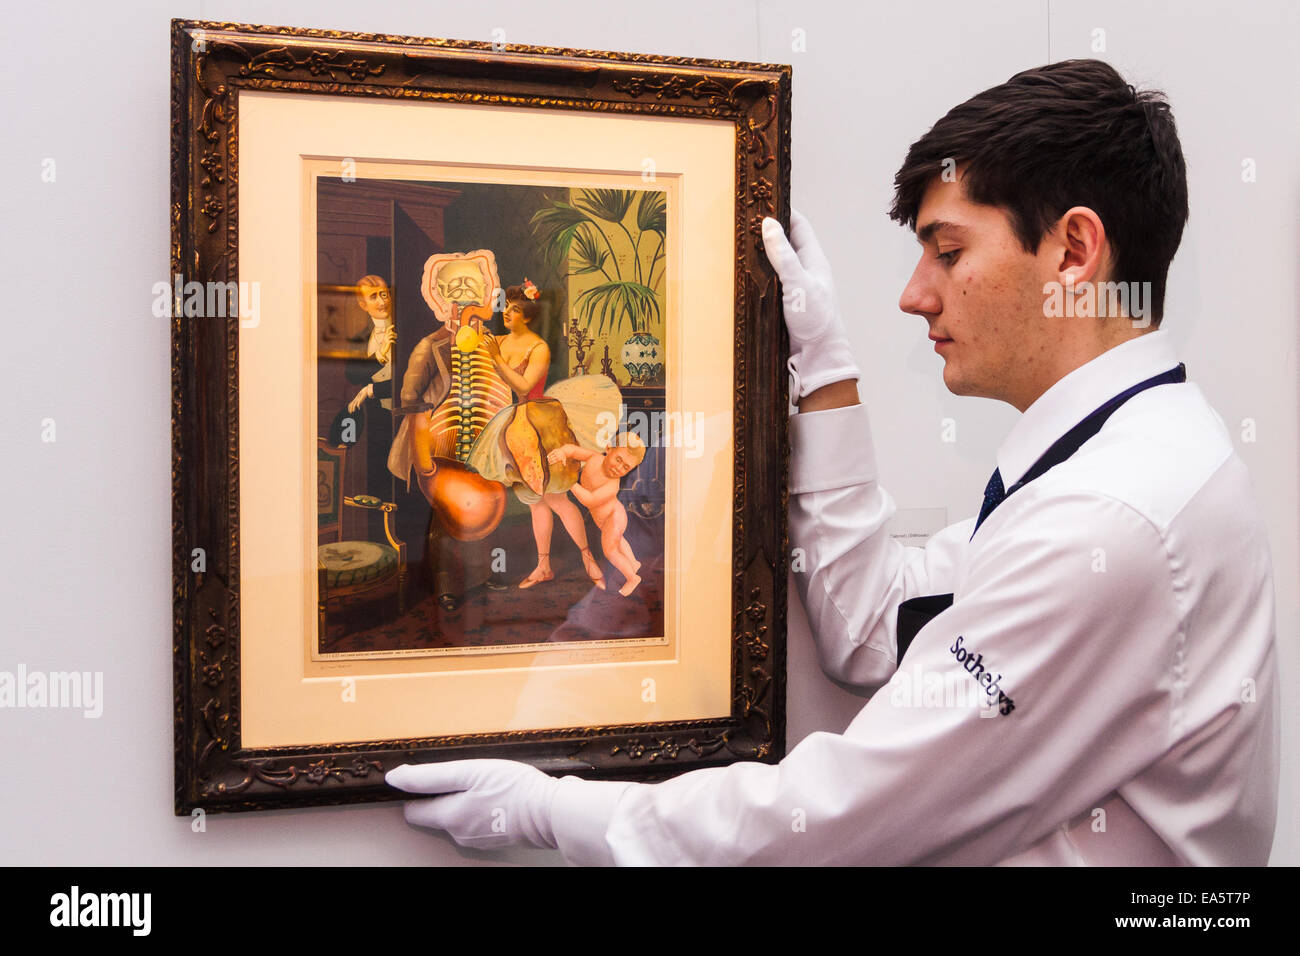 Sotheby's, Mayfair, London, November 7th 2014. Several outstanding examples of Czech avant-garde art from the Roy and Mary Cullen collection are to be auctioned by Sotheby’s on November 12th. PICTURED: A Sotheby's worker adjust the hanging of an untitled collage by Styrsky, which is expected to fetch up to £120,000 at auction. Credit:  Paul Davey/Alamy Live News Stock Photo